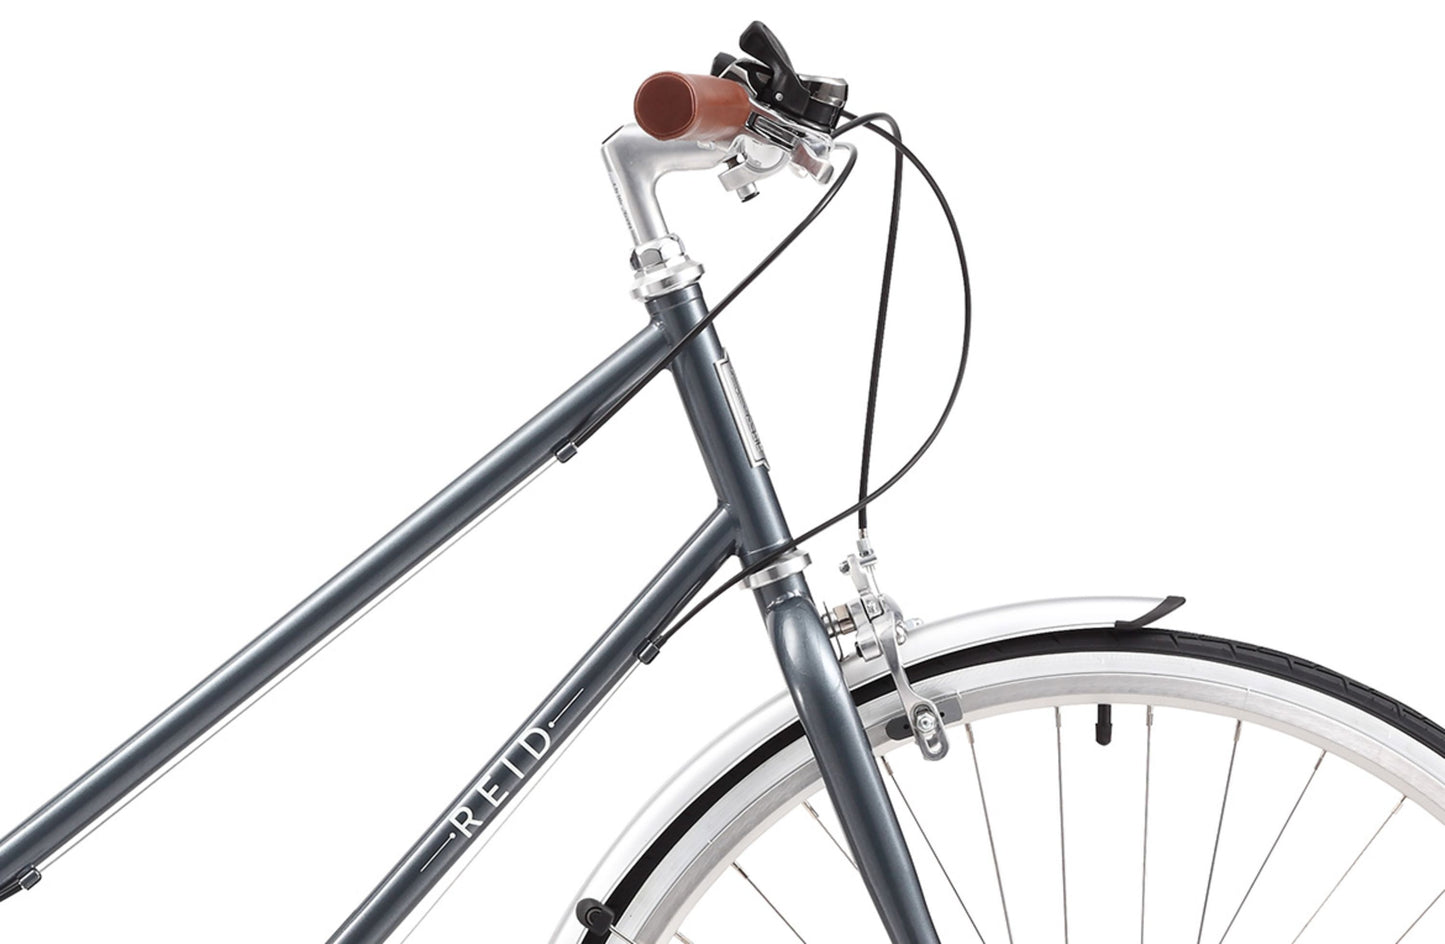 Ladies Esprit Vintage Bike in Metallic Charcoal showing front mudguard and front brake from Reid Cycles Australia